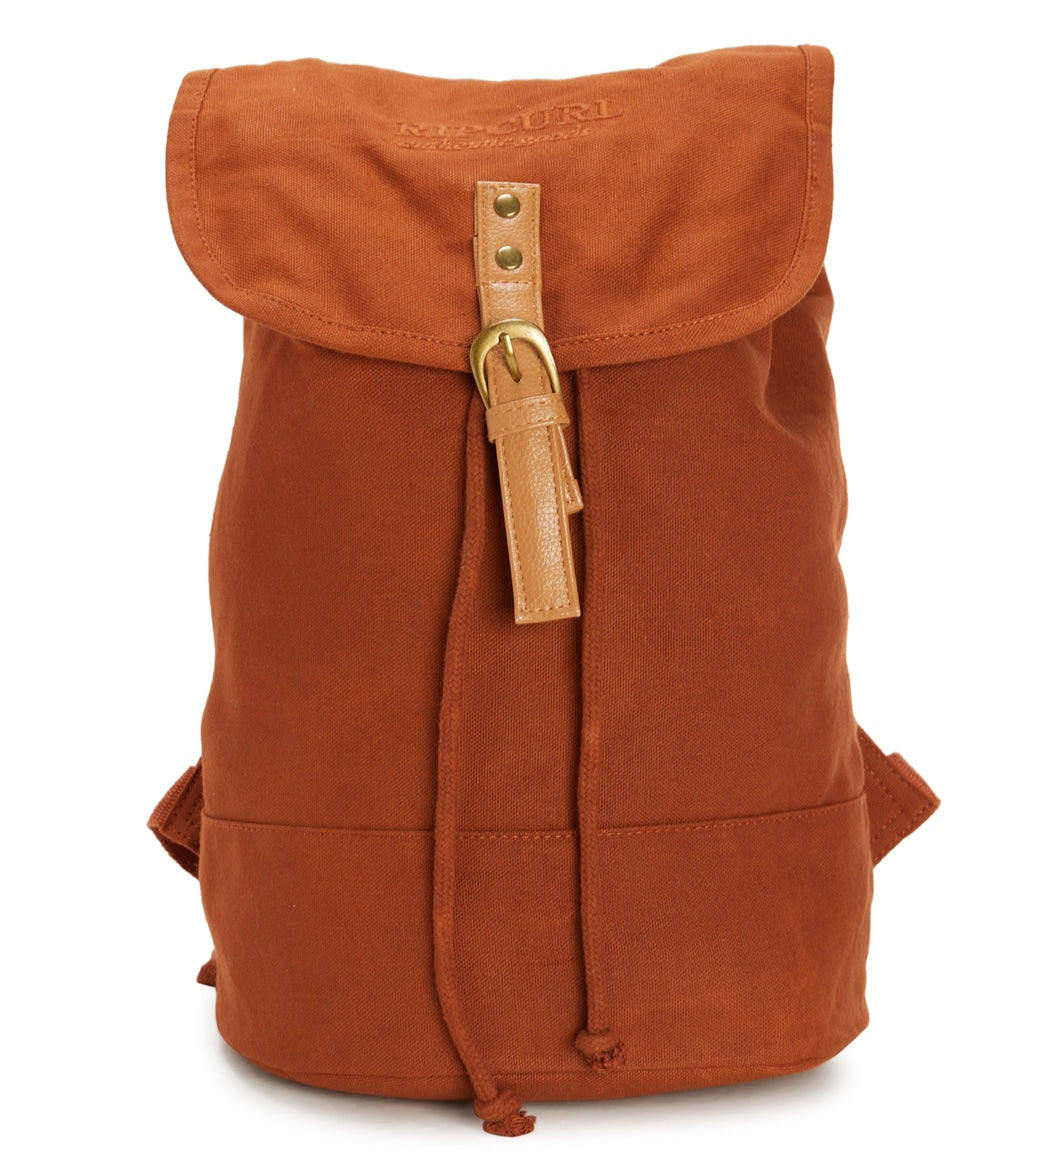 Rip Curl Women's Waxed Canvas Mini 10L Backpack at